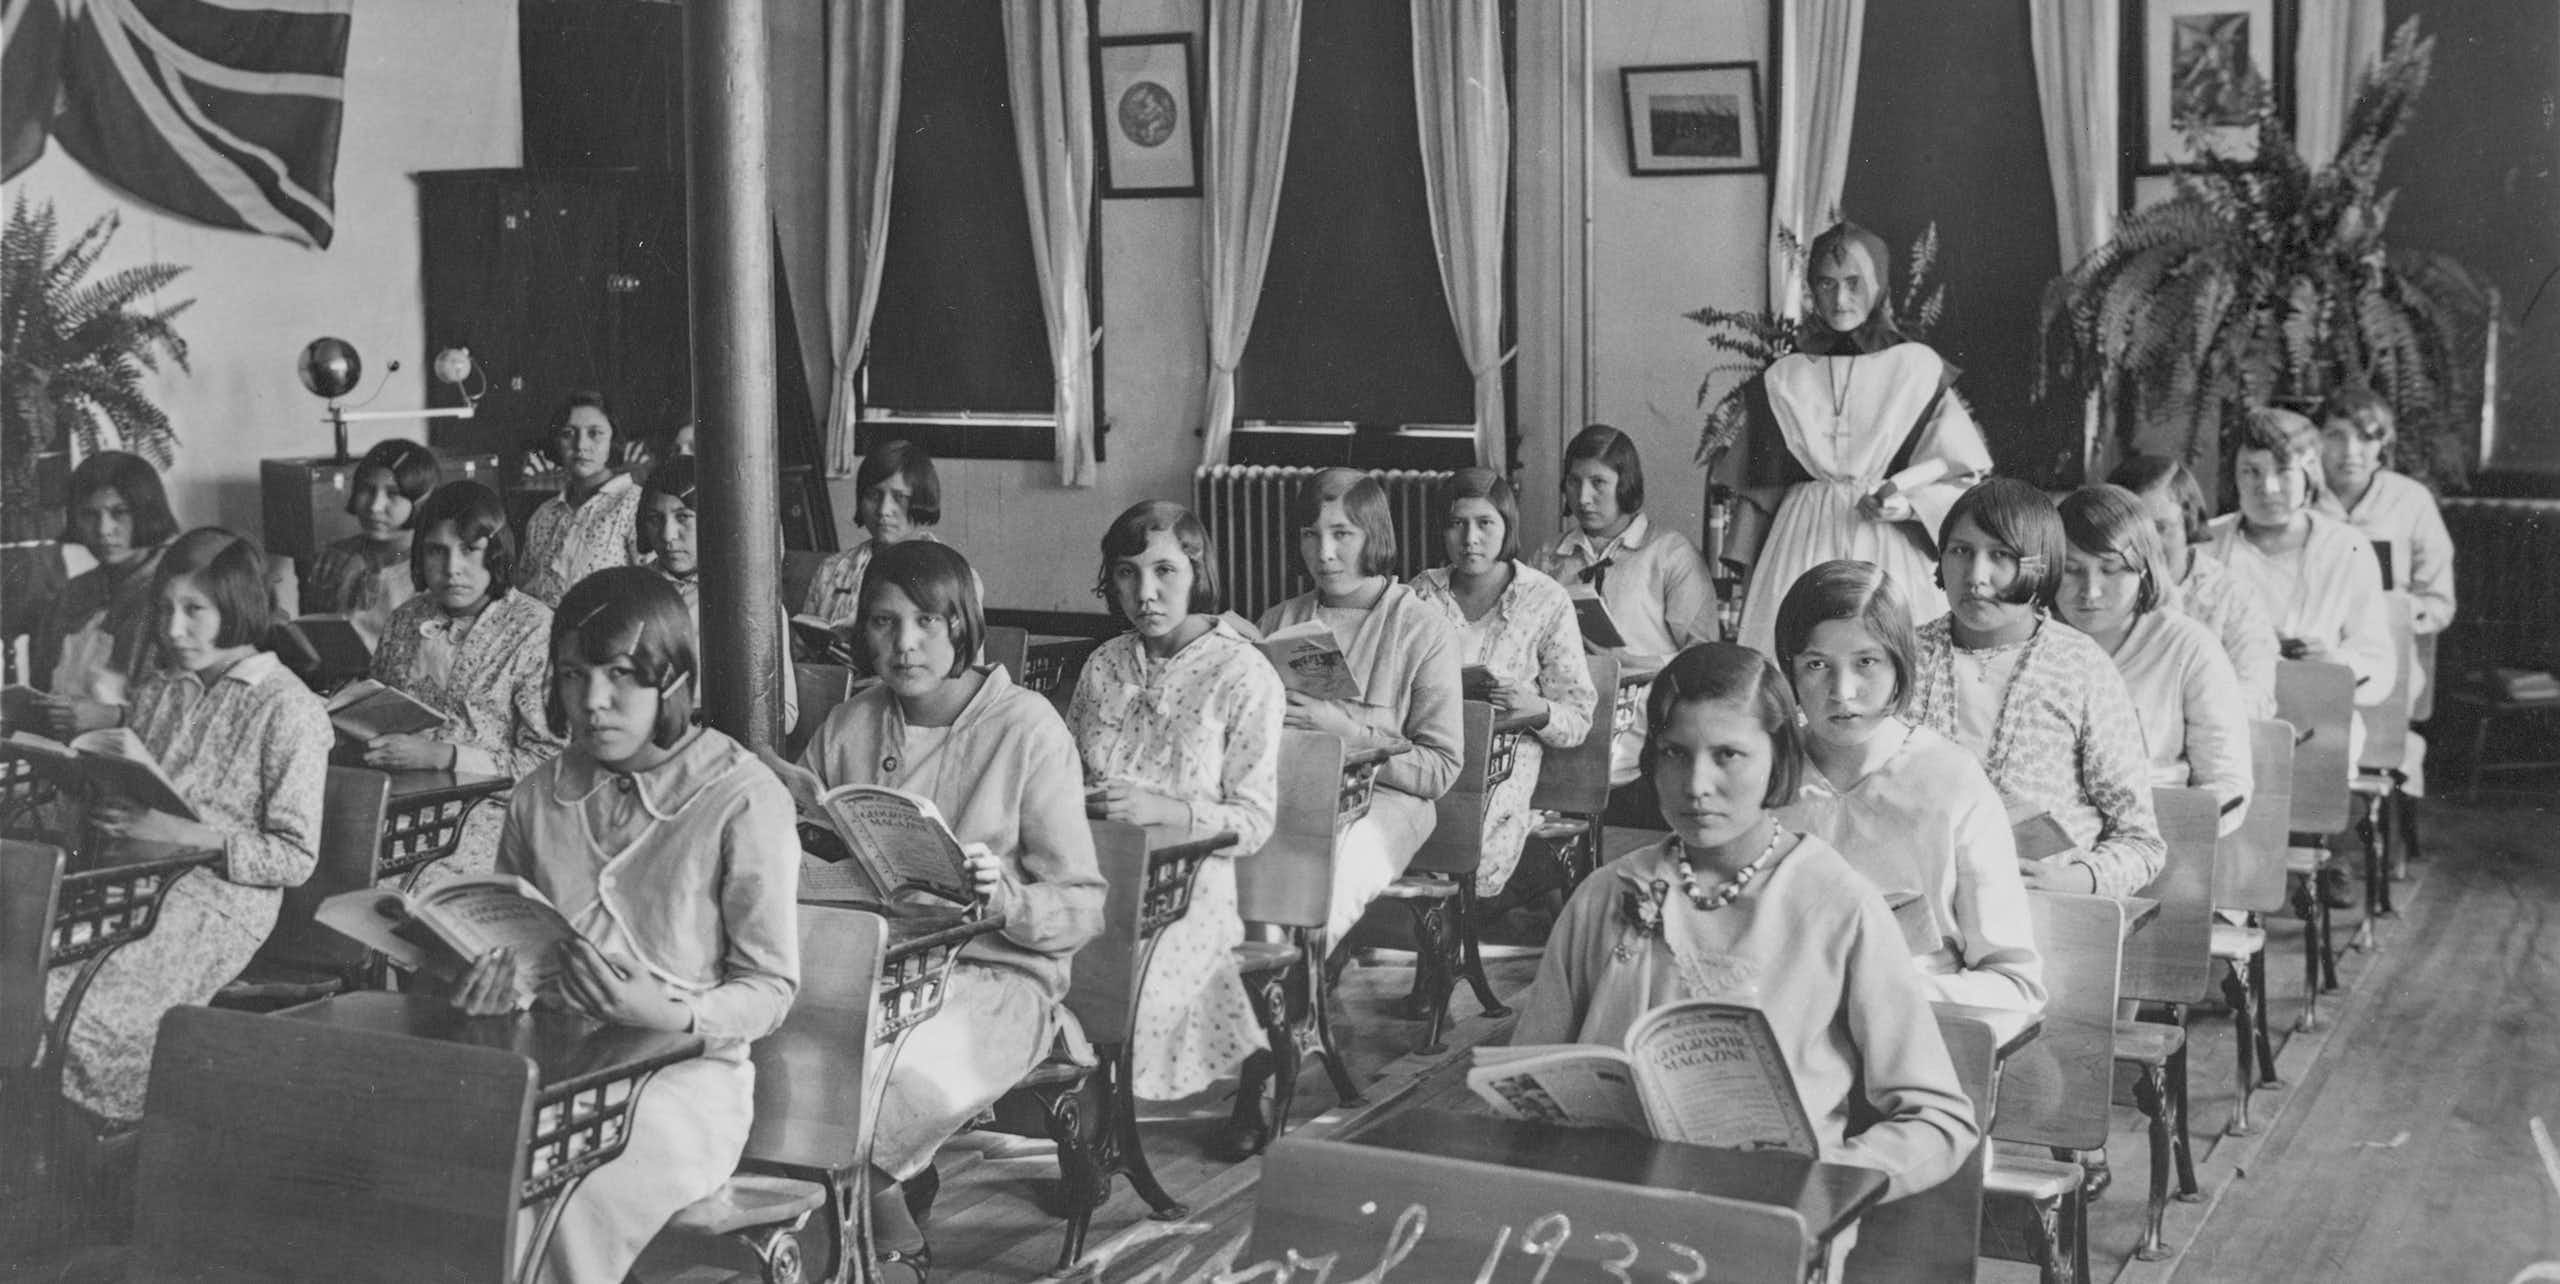 Black and white photo showing 1930s classroom of Indigenous adolescent girls sitting in rows of desks.